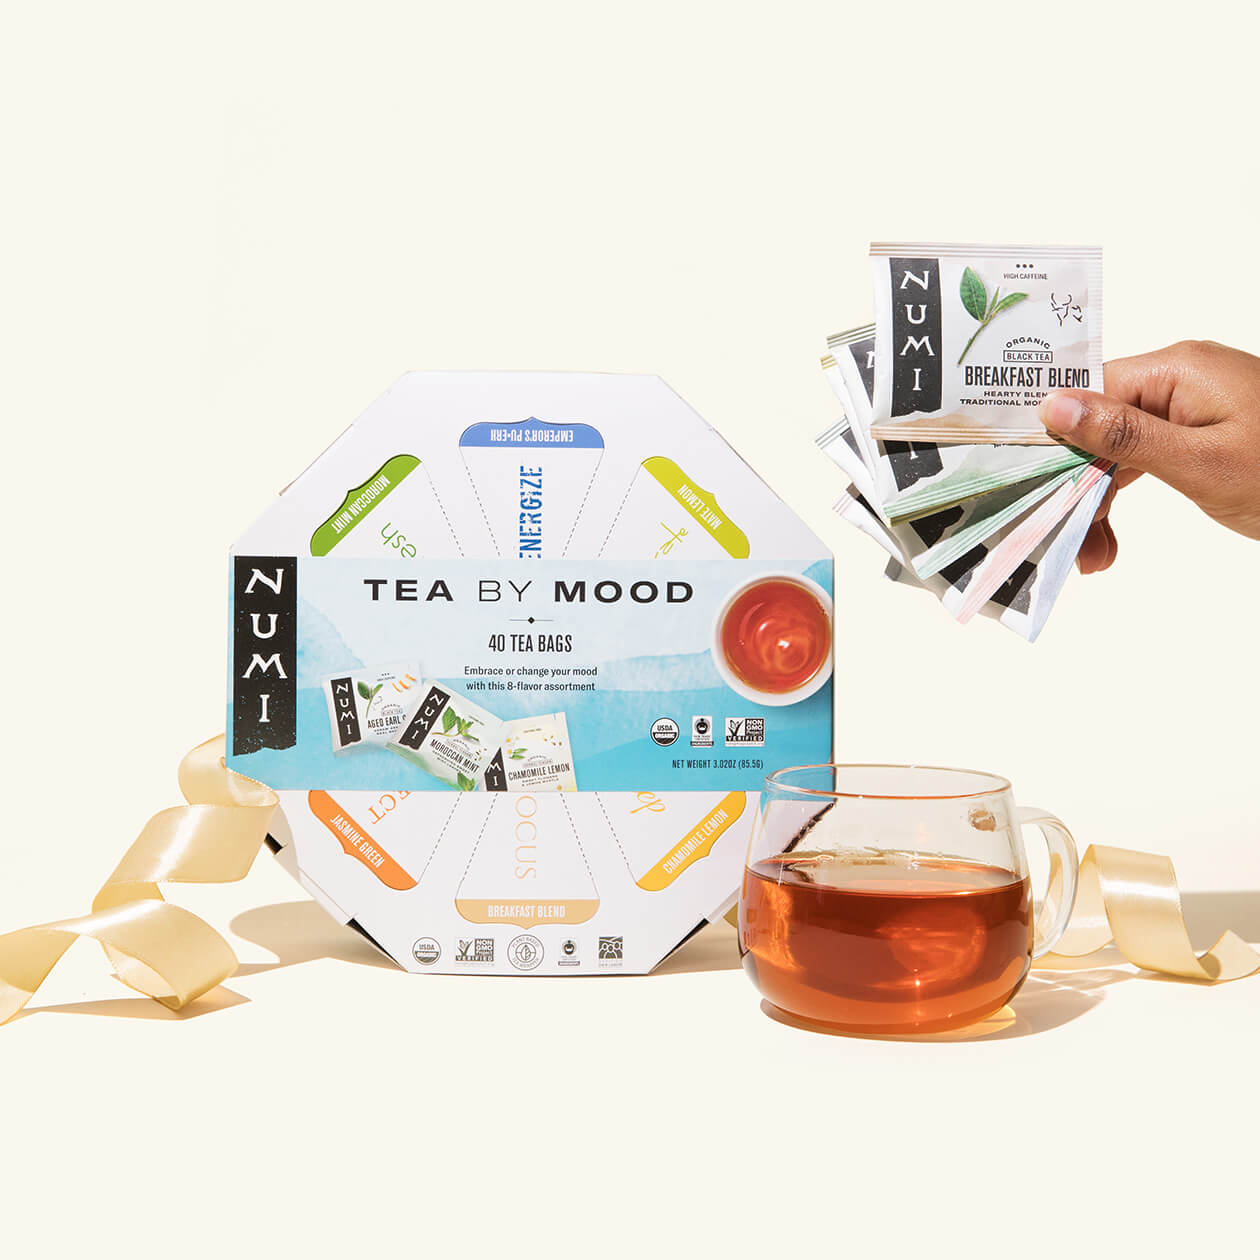 A Numi Tea By Mood gift with a ribbon, a cup of brewed tea, and a person holding the variety of tea bags that come in this gift